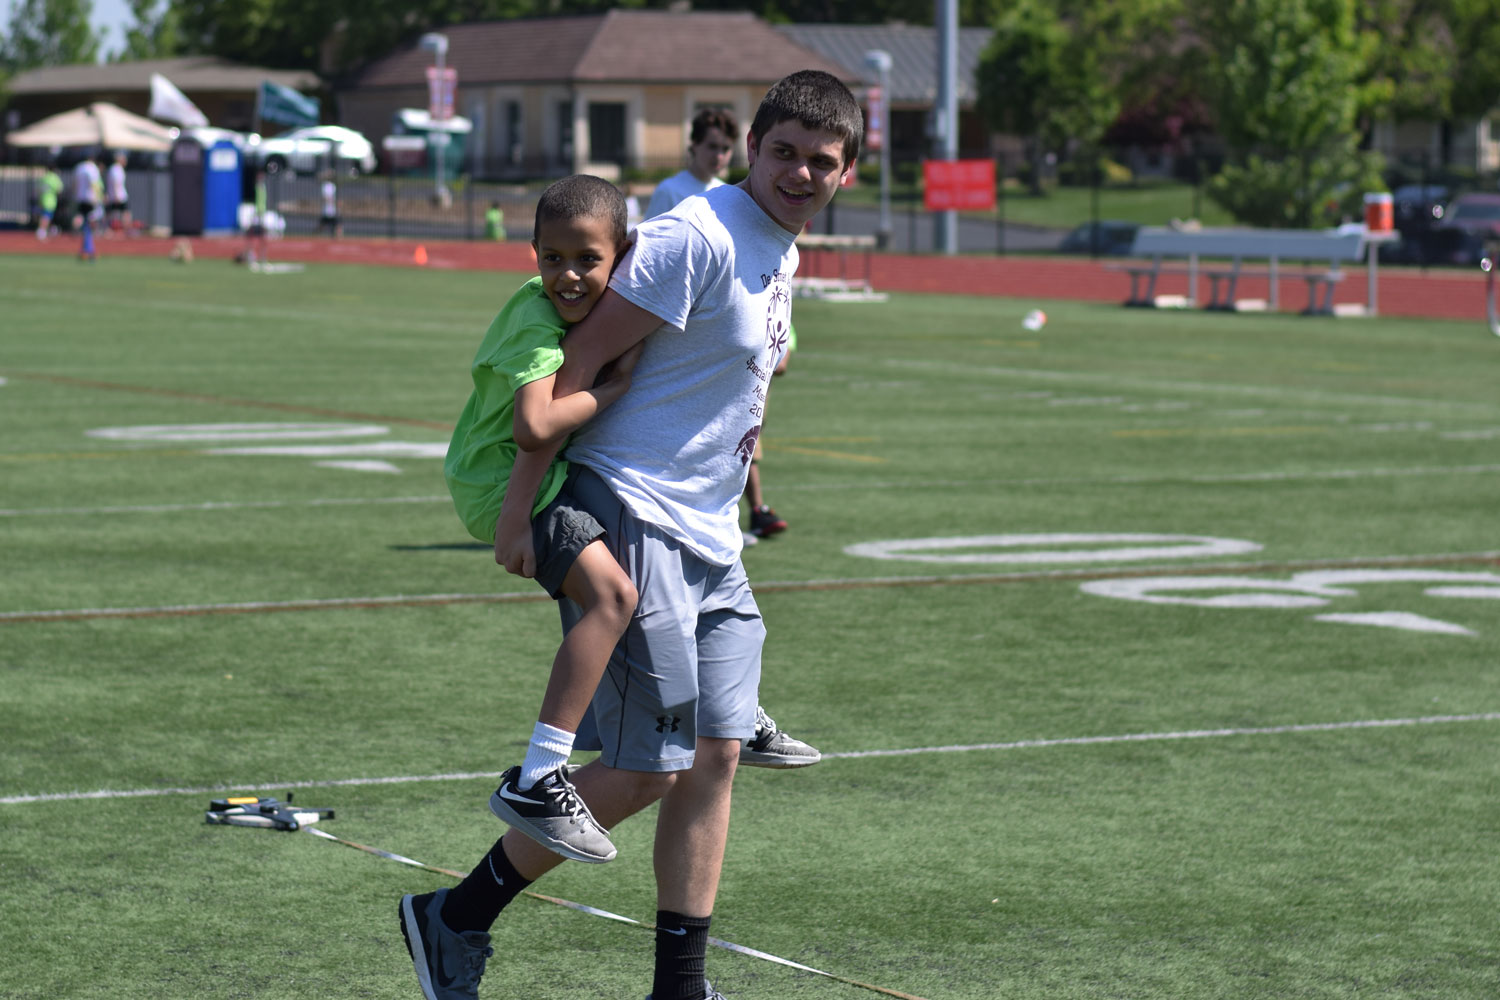 Joseph Pangelinan carries his buddy across the field during the Special Olympics